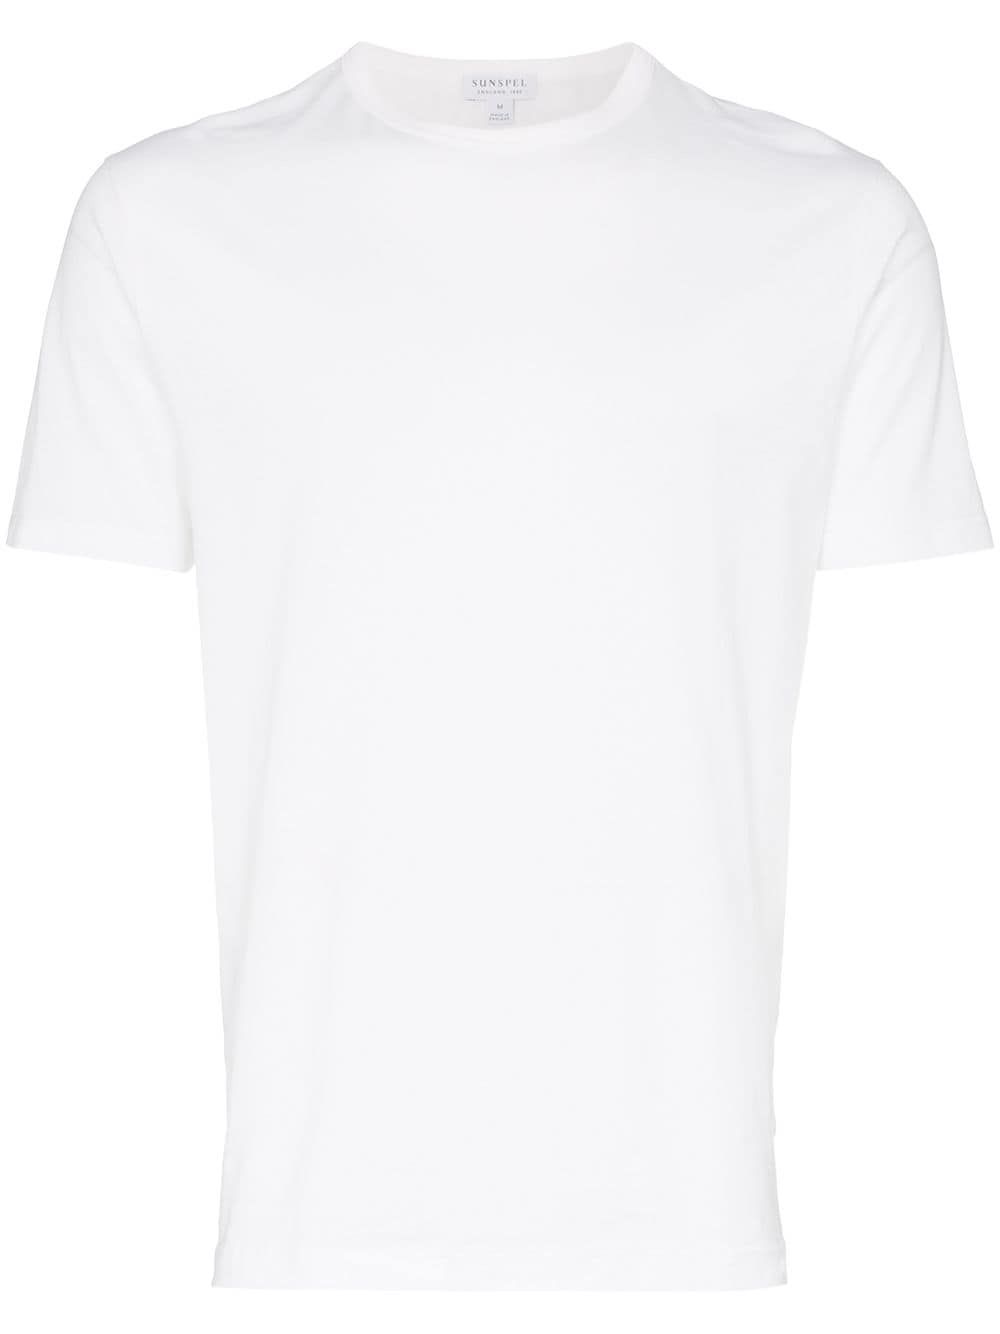 15 Best White T-Shirts For Any Budget 